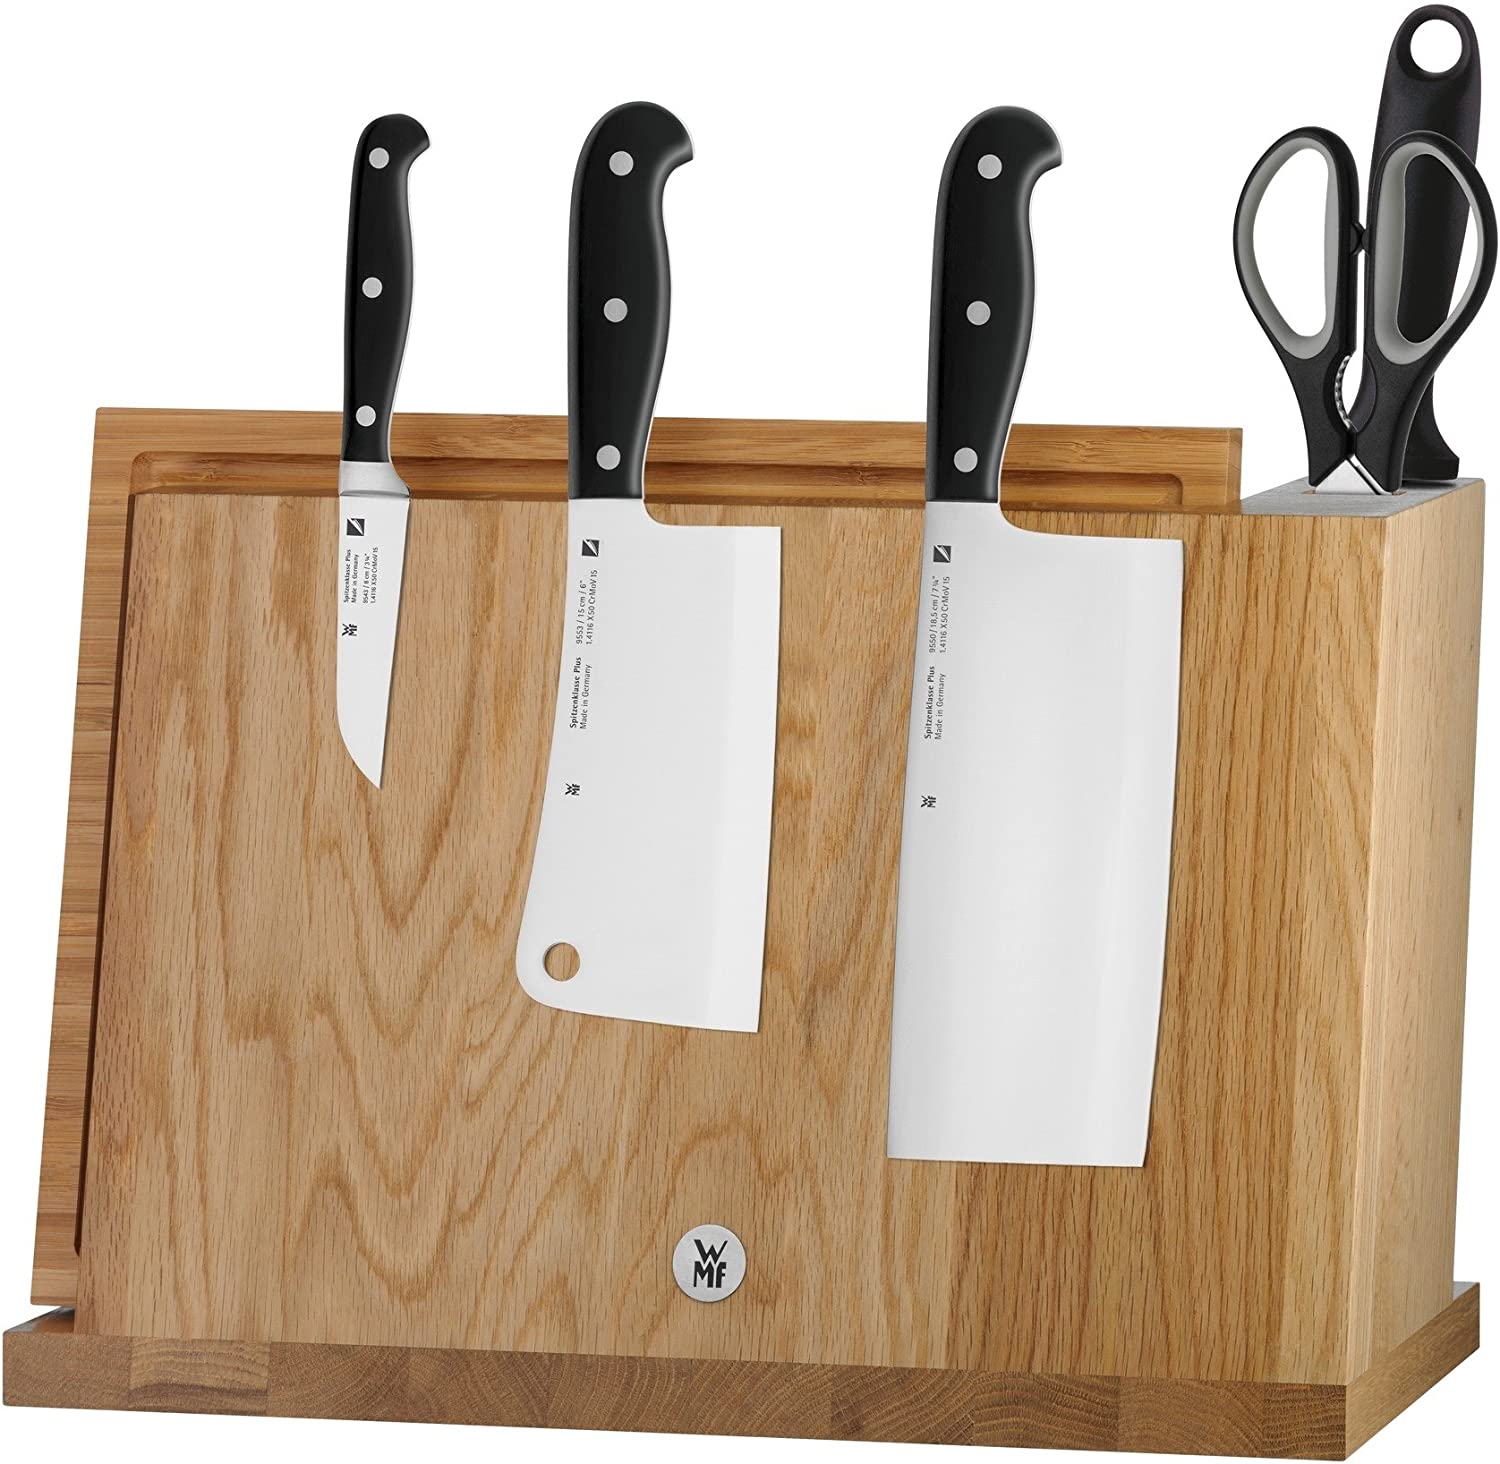 WMF Spitzenklass Plus Knife Block with Knife Set, 7 Pieces, Special Blade Steel, 3 Knives, Smoothed, Sharpening Steel, Scissors, Board, Bamboo Block Magnetic